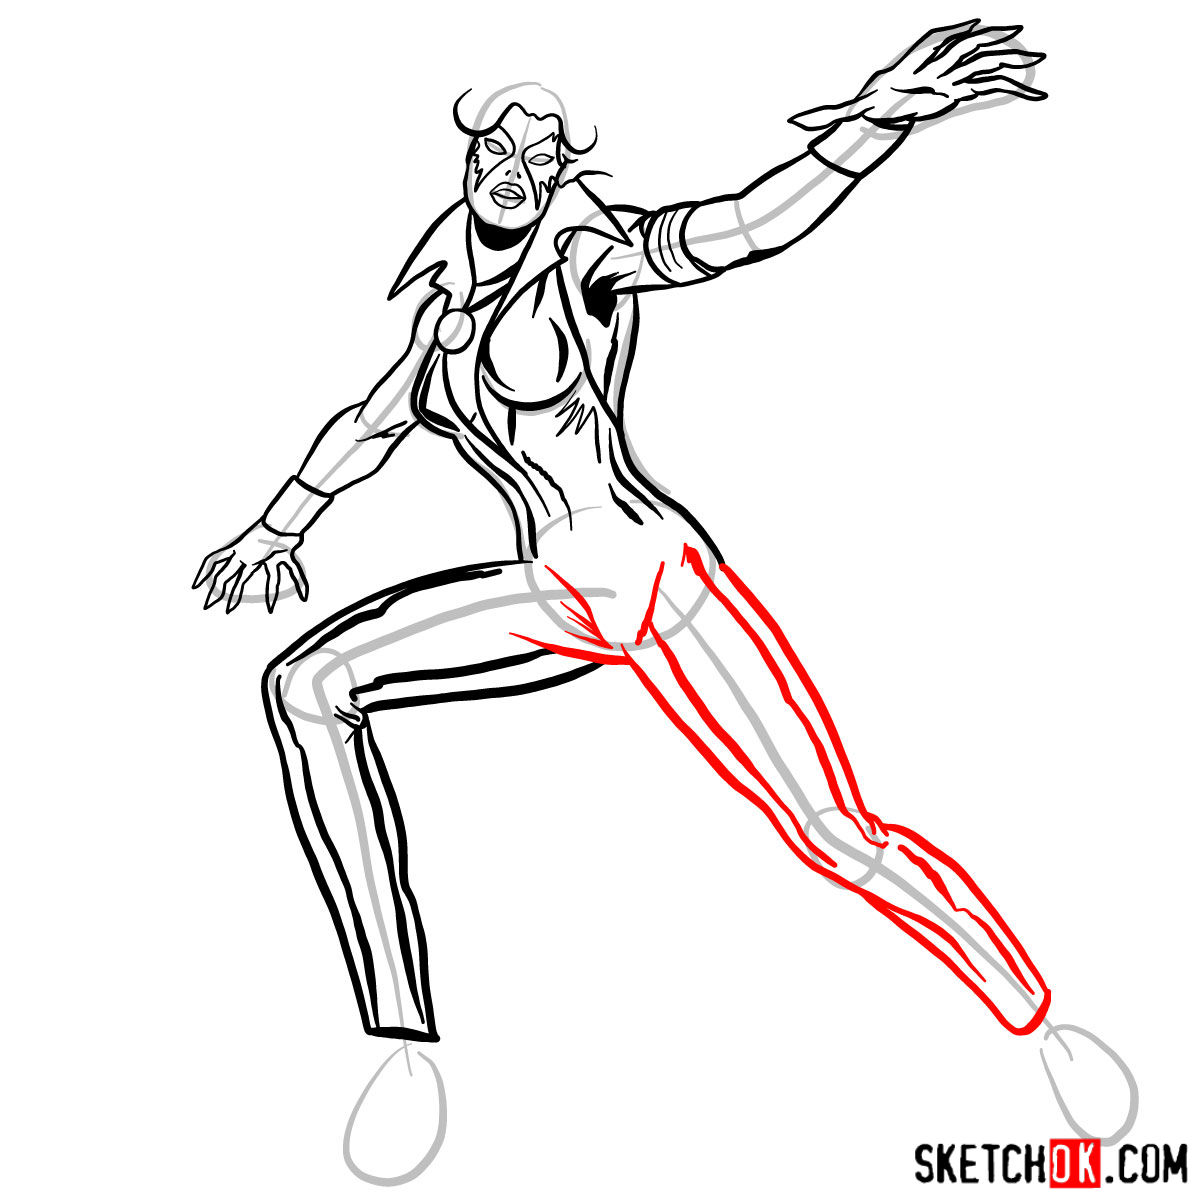 How to draw Dazzler the mutant from X-Men series - step 10